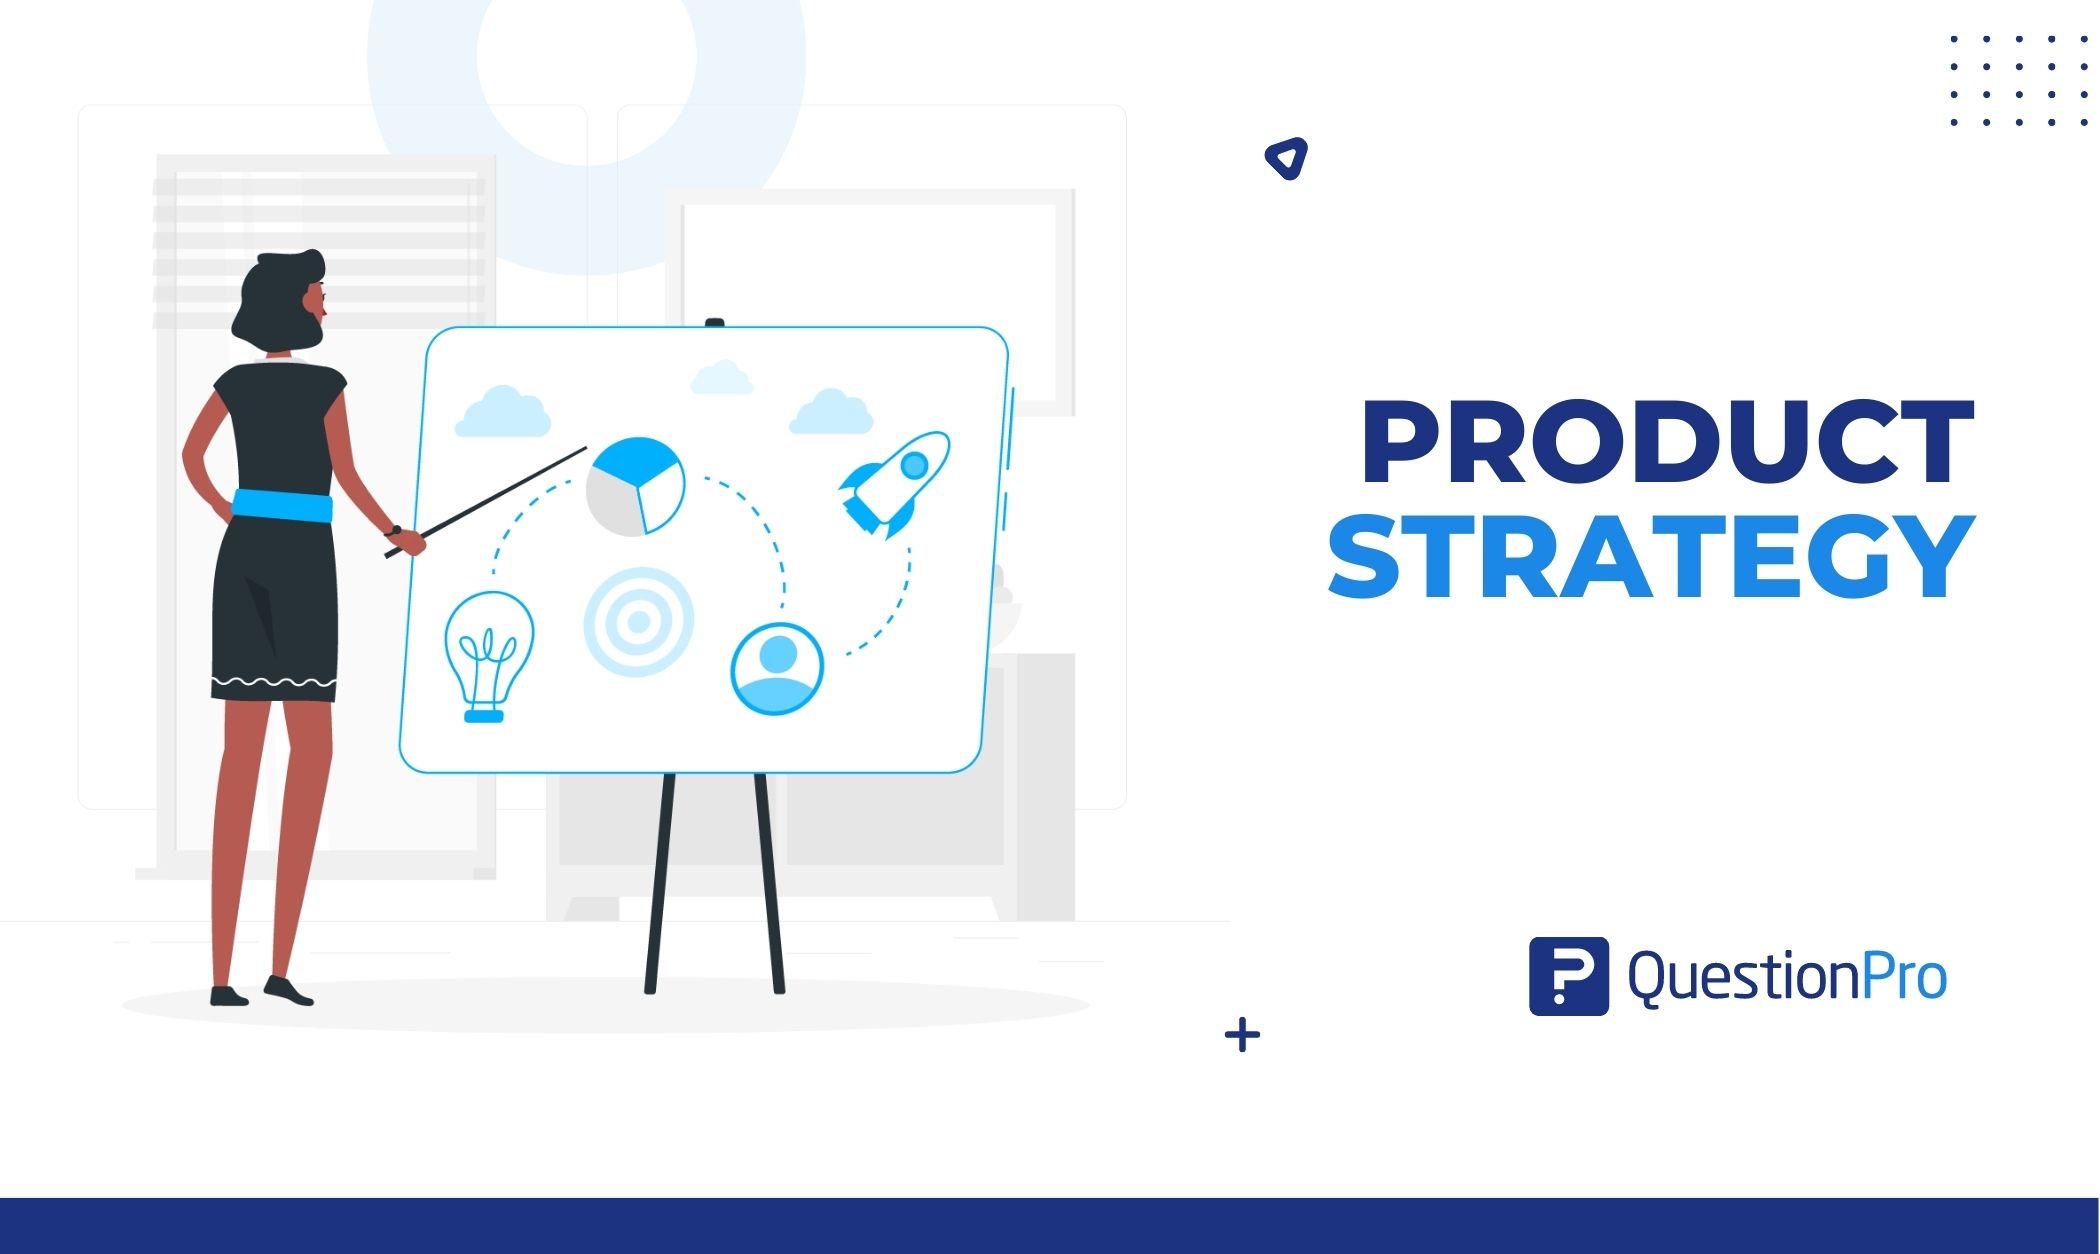 Building Product Strategy